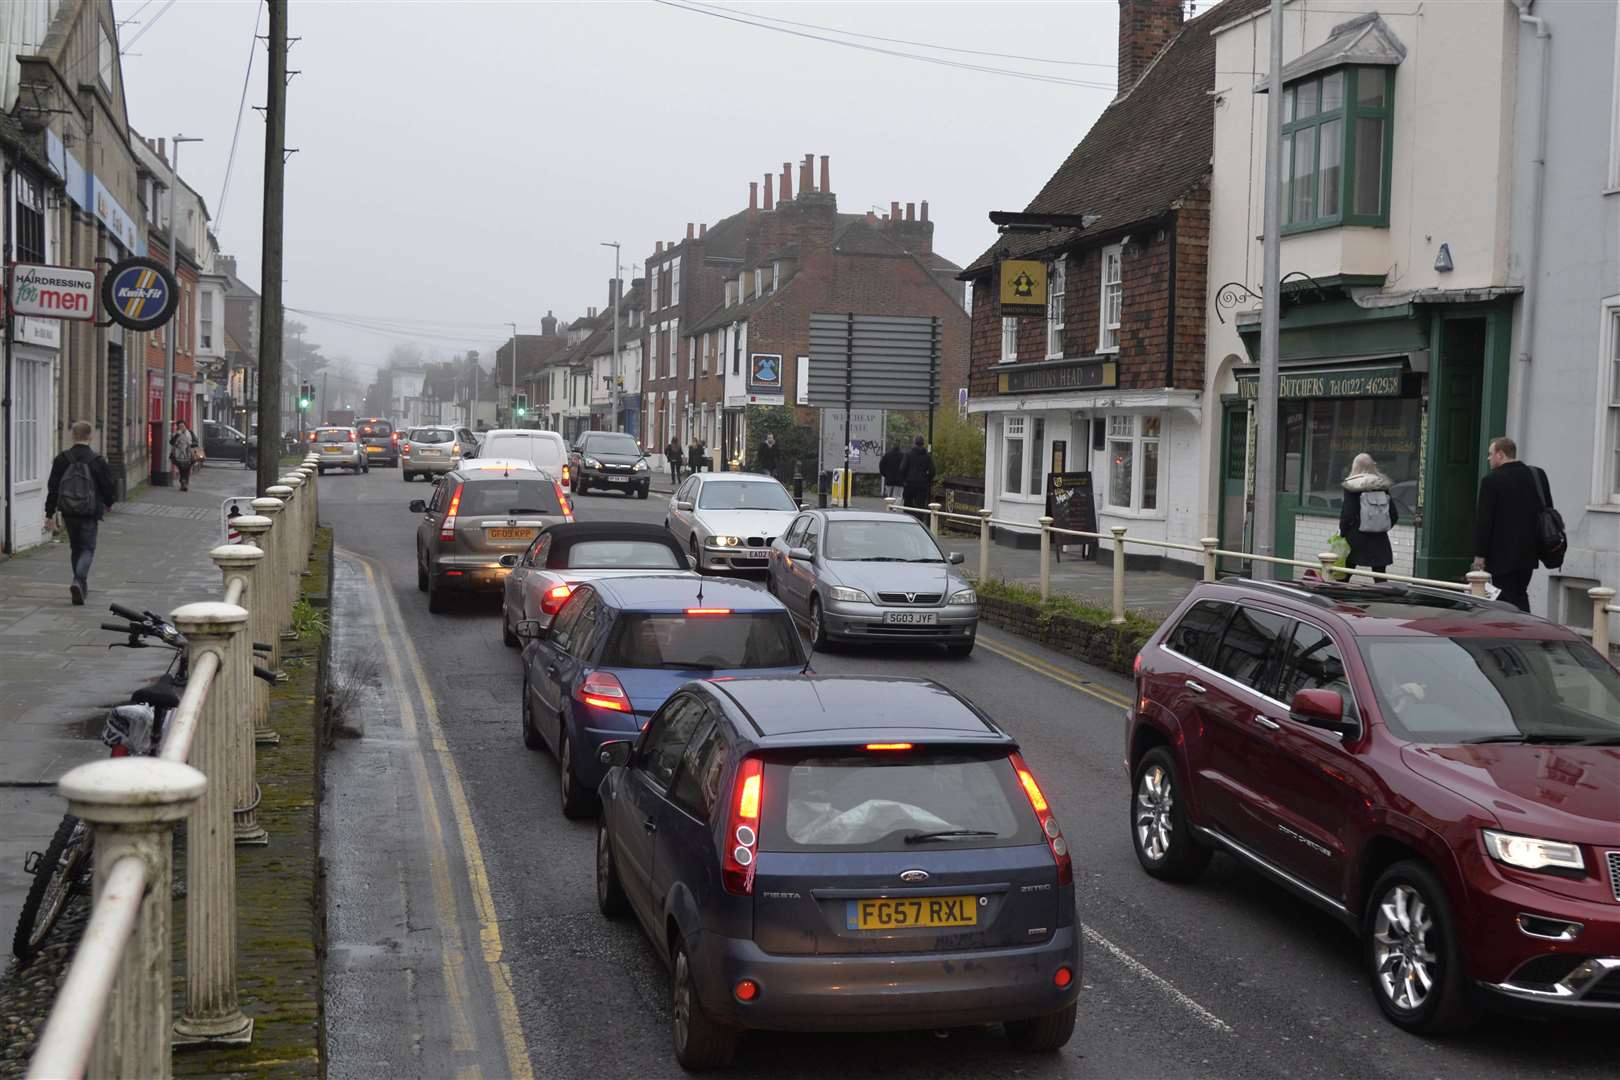 Traffic heading in and out of Canterbury along Wincheap regularly comes to a standstill